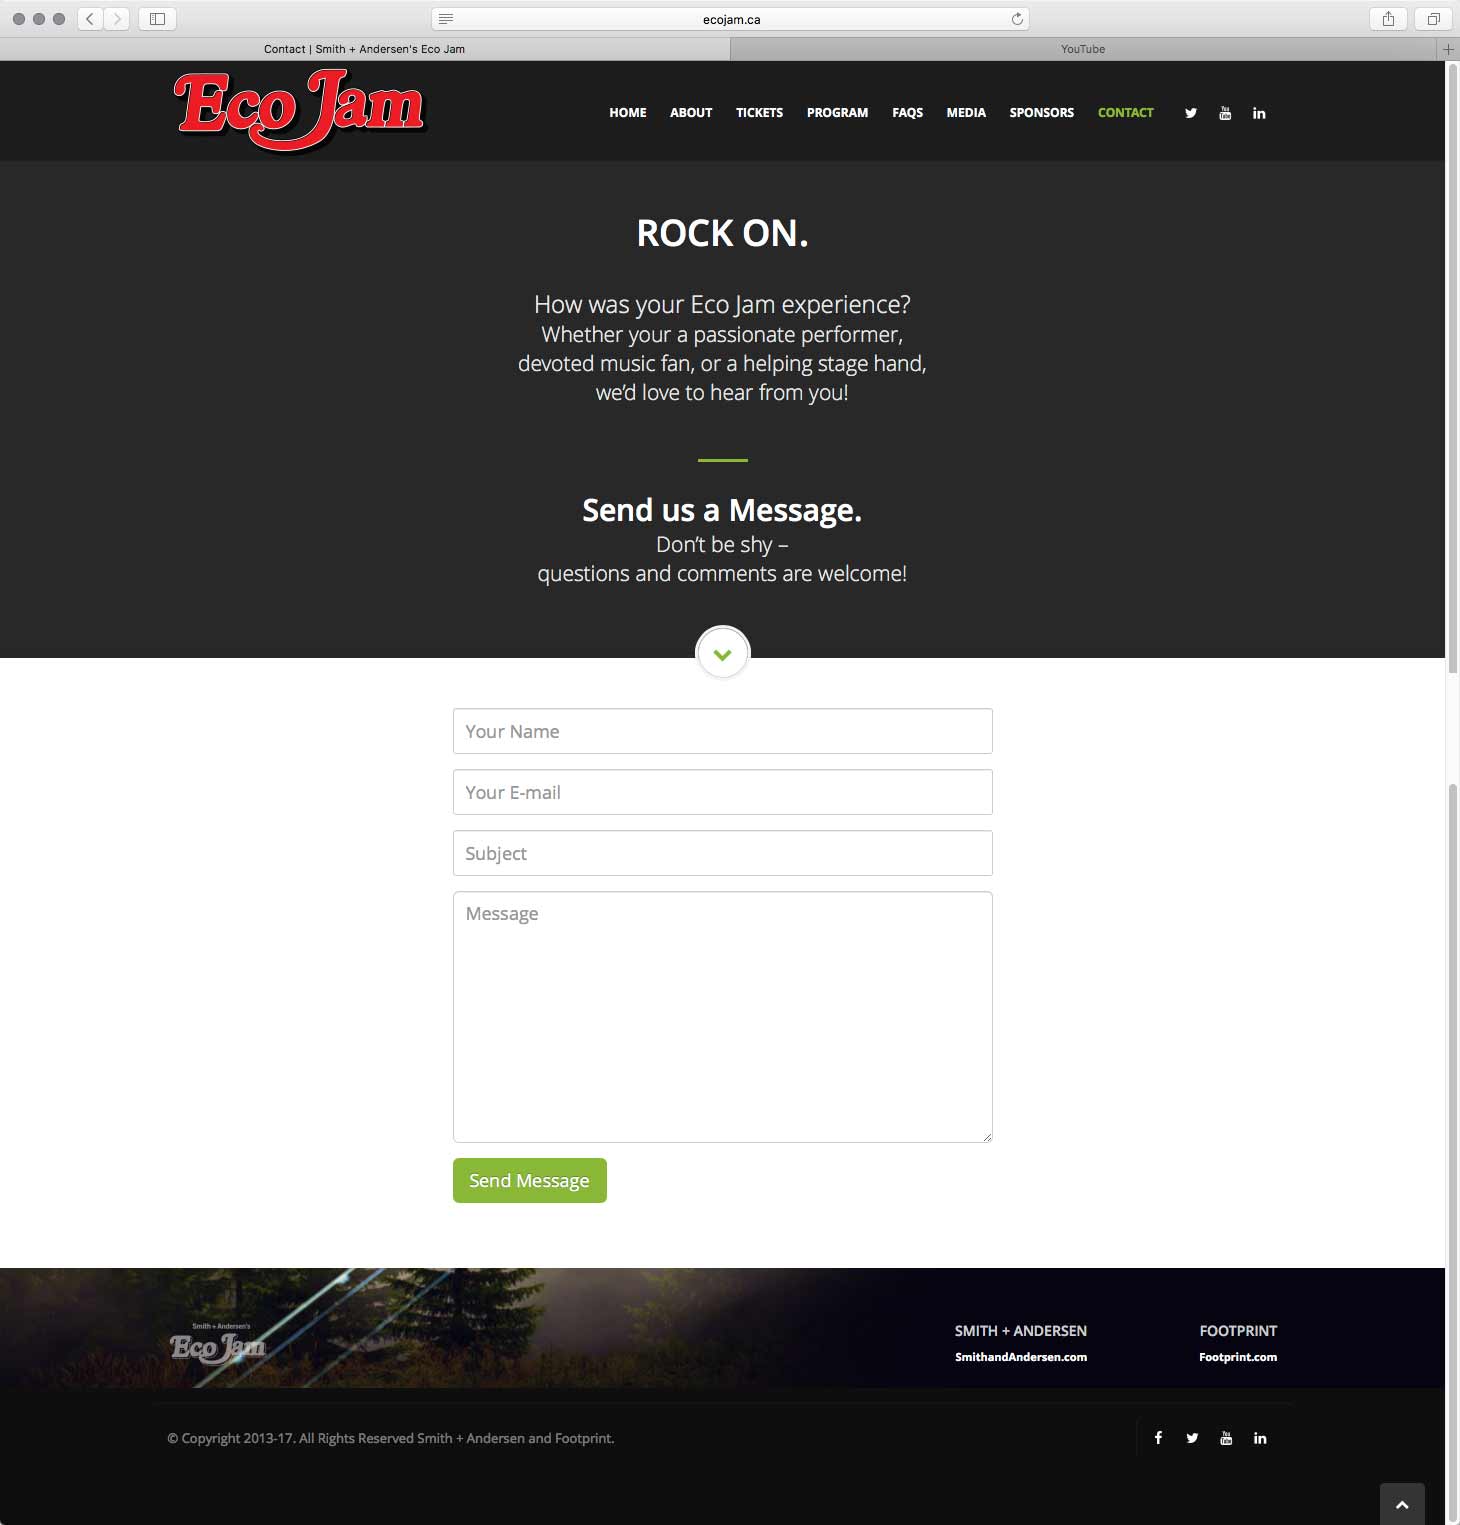 Eco Jam Contact page